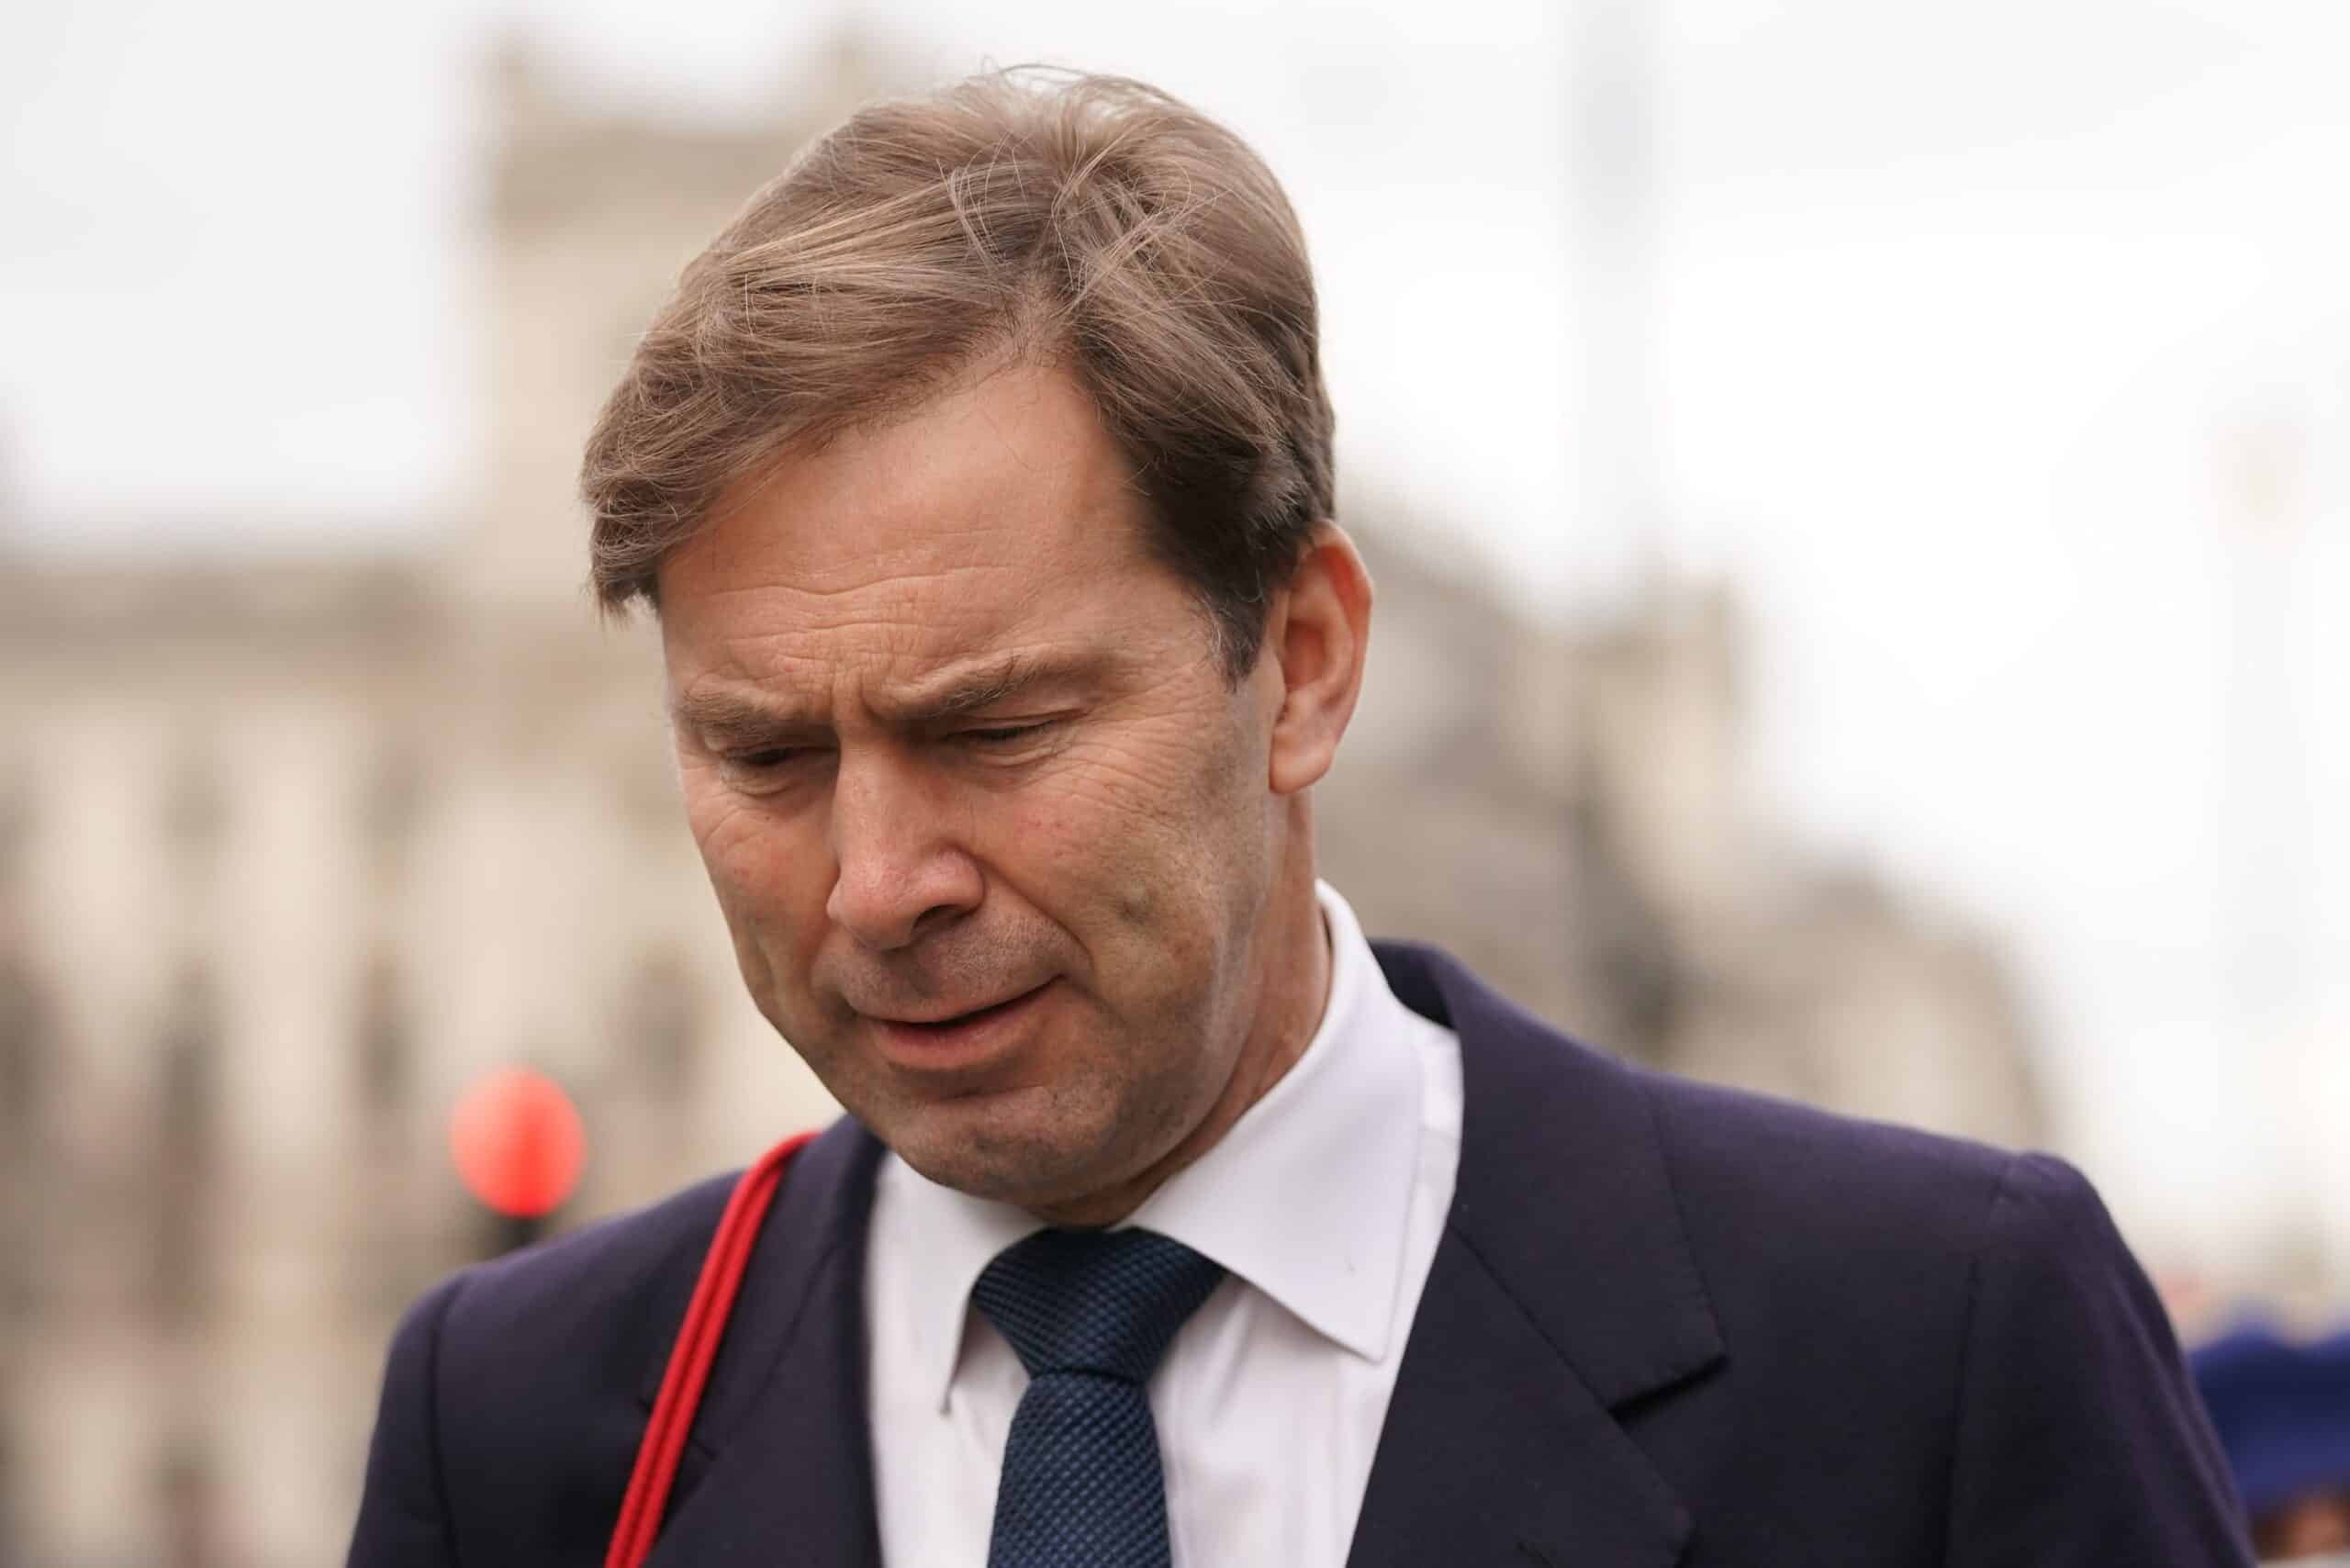 ‘We must admit Brexit is a mistake and rejoin the single market’ – Tobias Ellwood